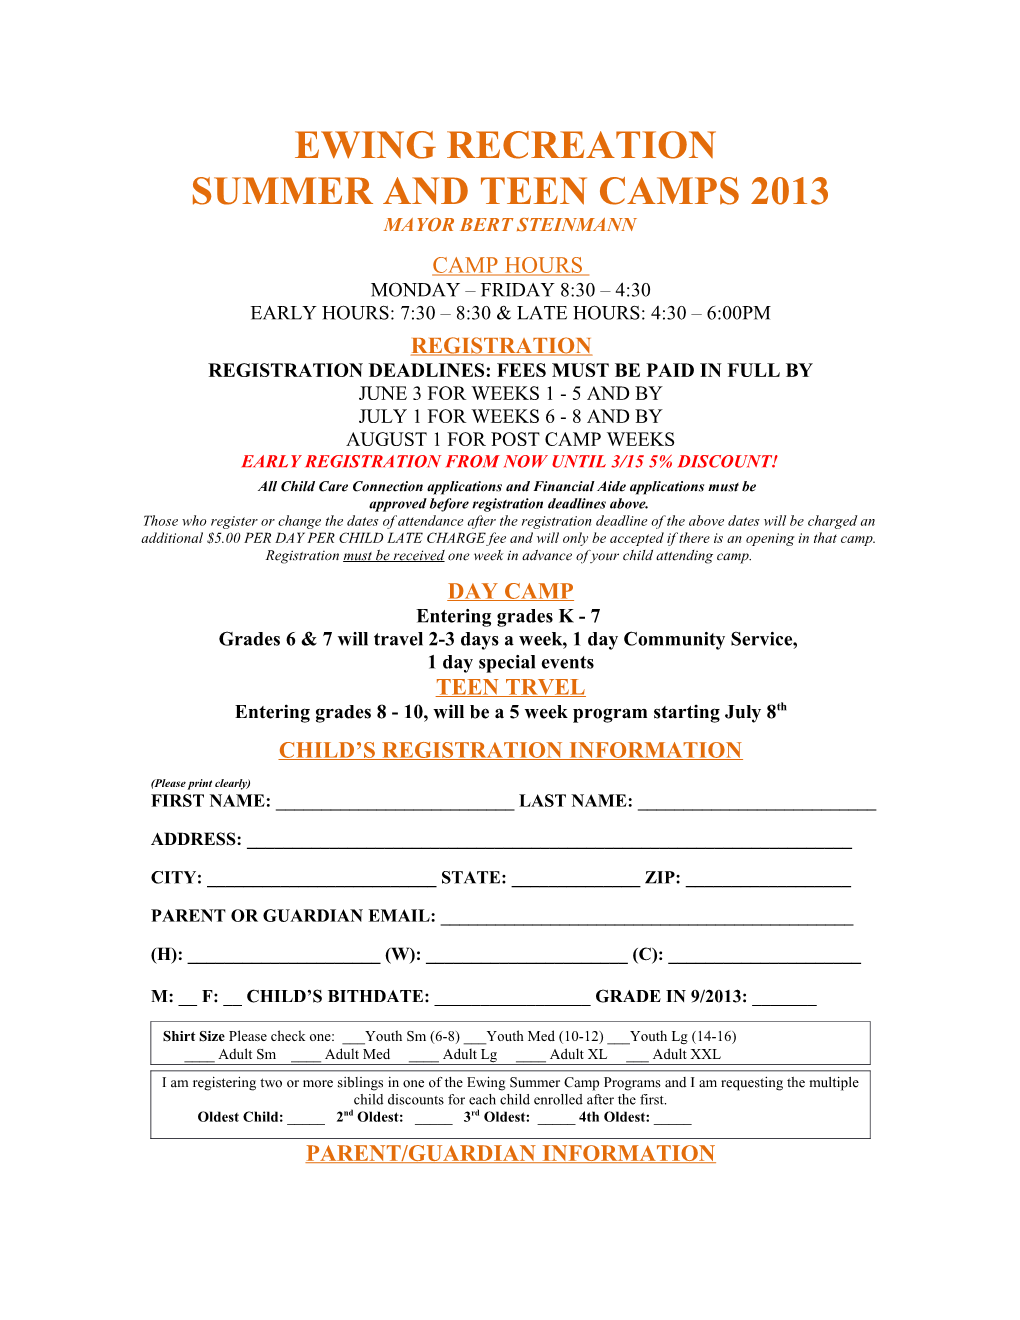 Summer and Teen Camps 2013